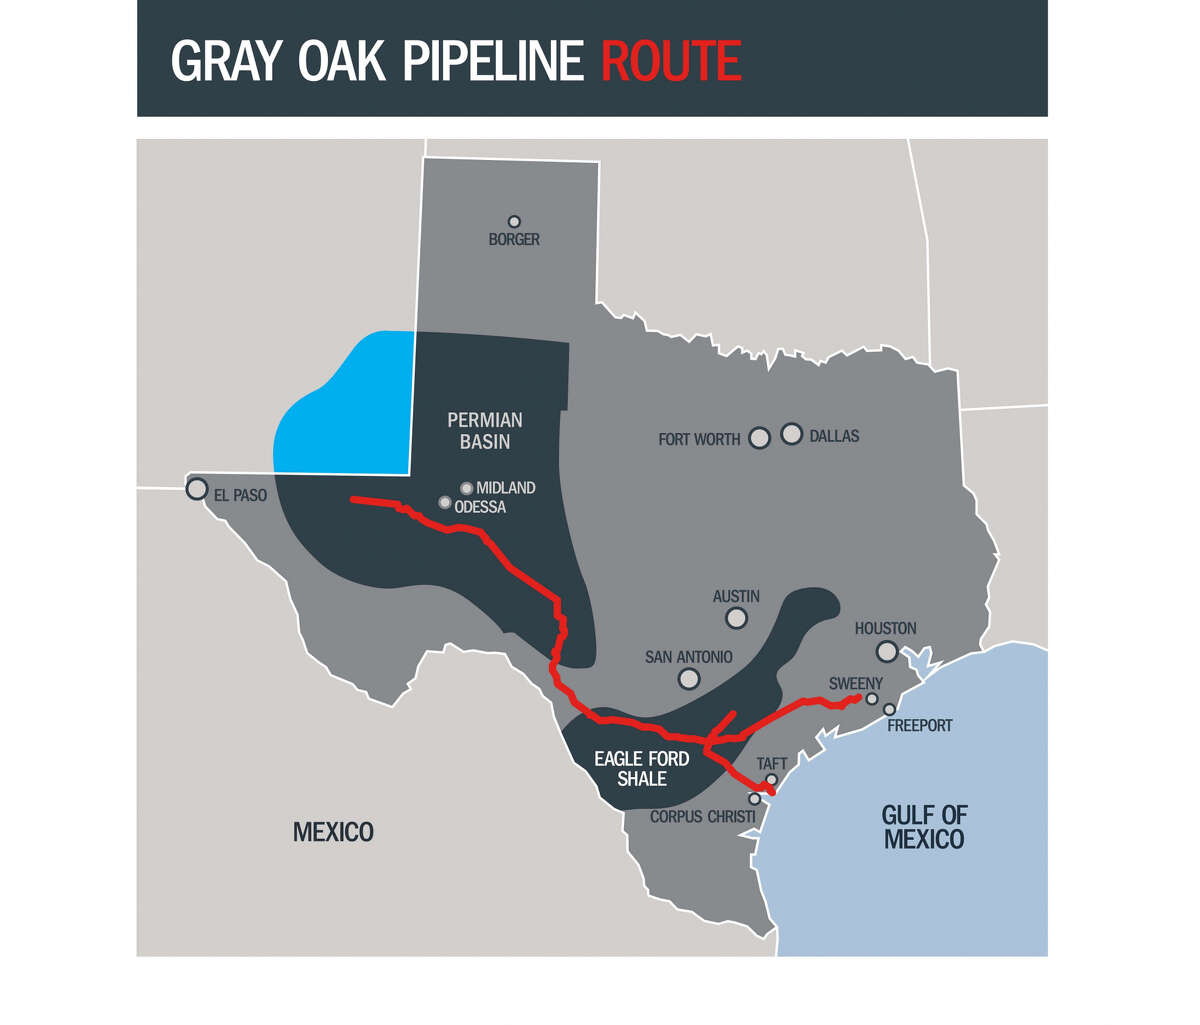 Expected to be in service by the end of 2019, the Gray Oak Pipeline is designed to move crude oil from the Permian Basin to destinations along the Gulf Coast.